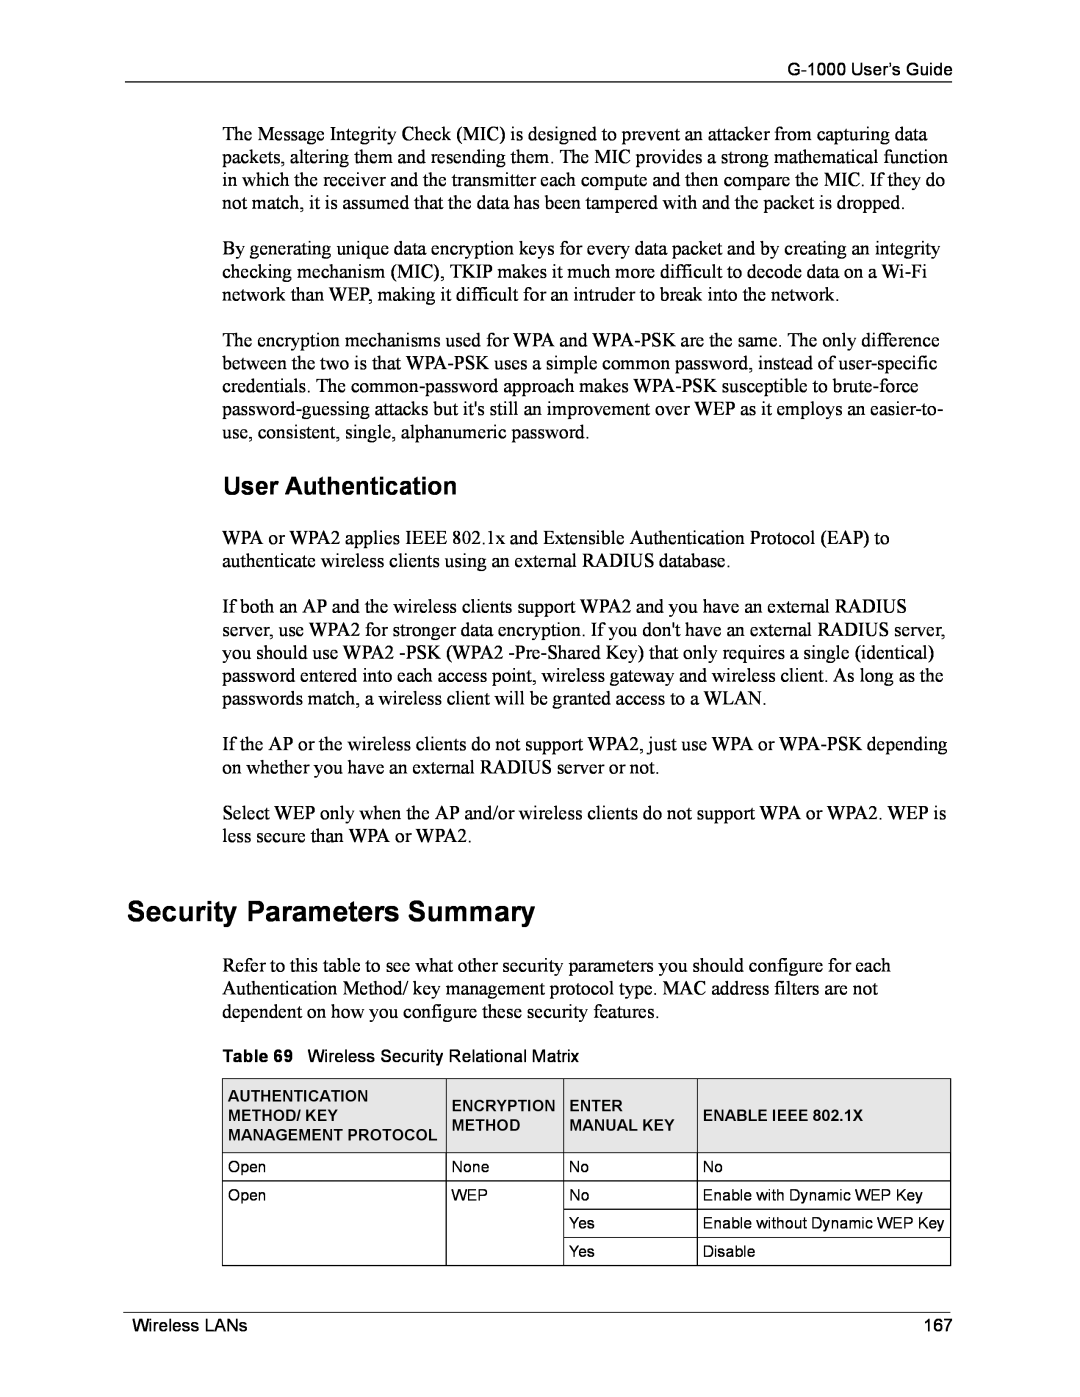 ZyXEL Communications G-1000 manual Security Parameters Summary, User Authentication 